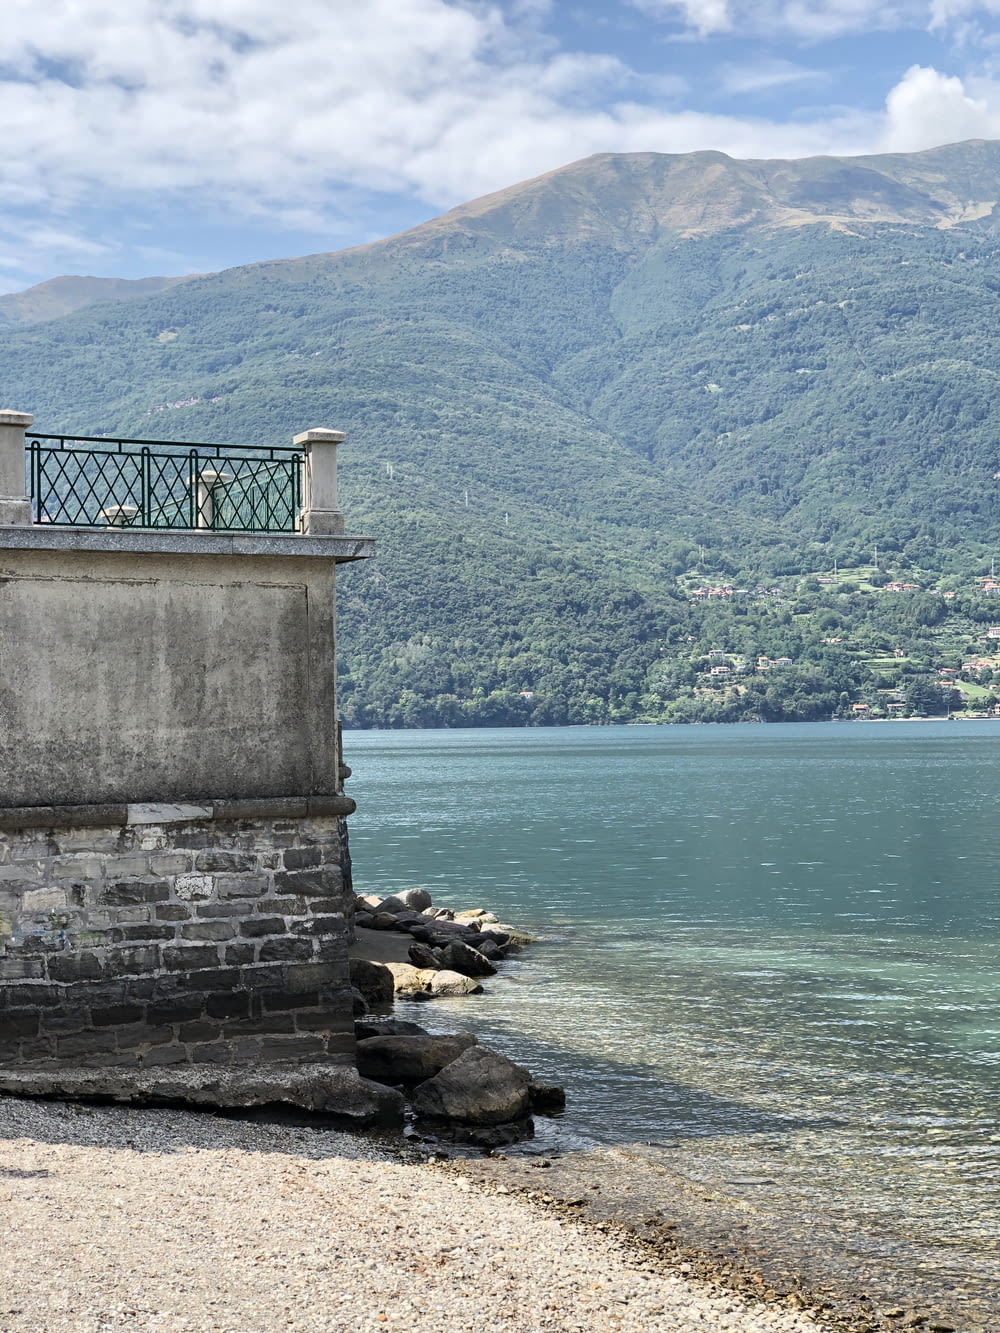 a clock tower sitting on top of a stone wall next to a body of water